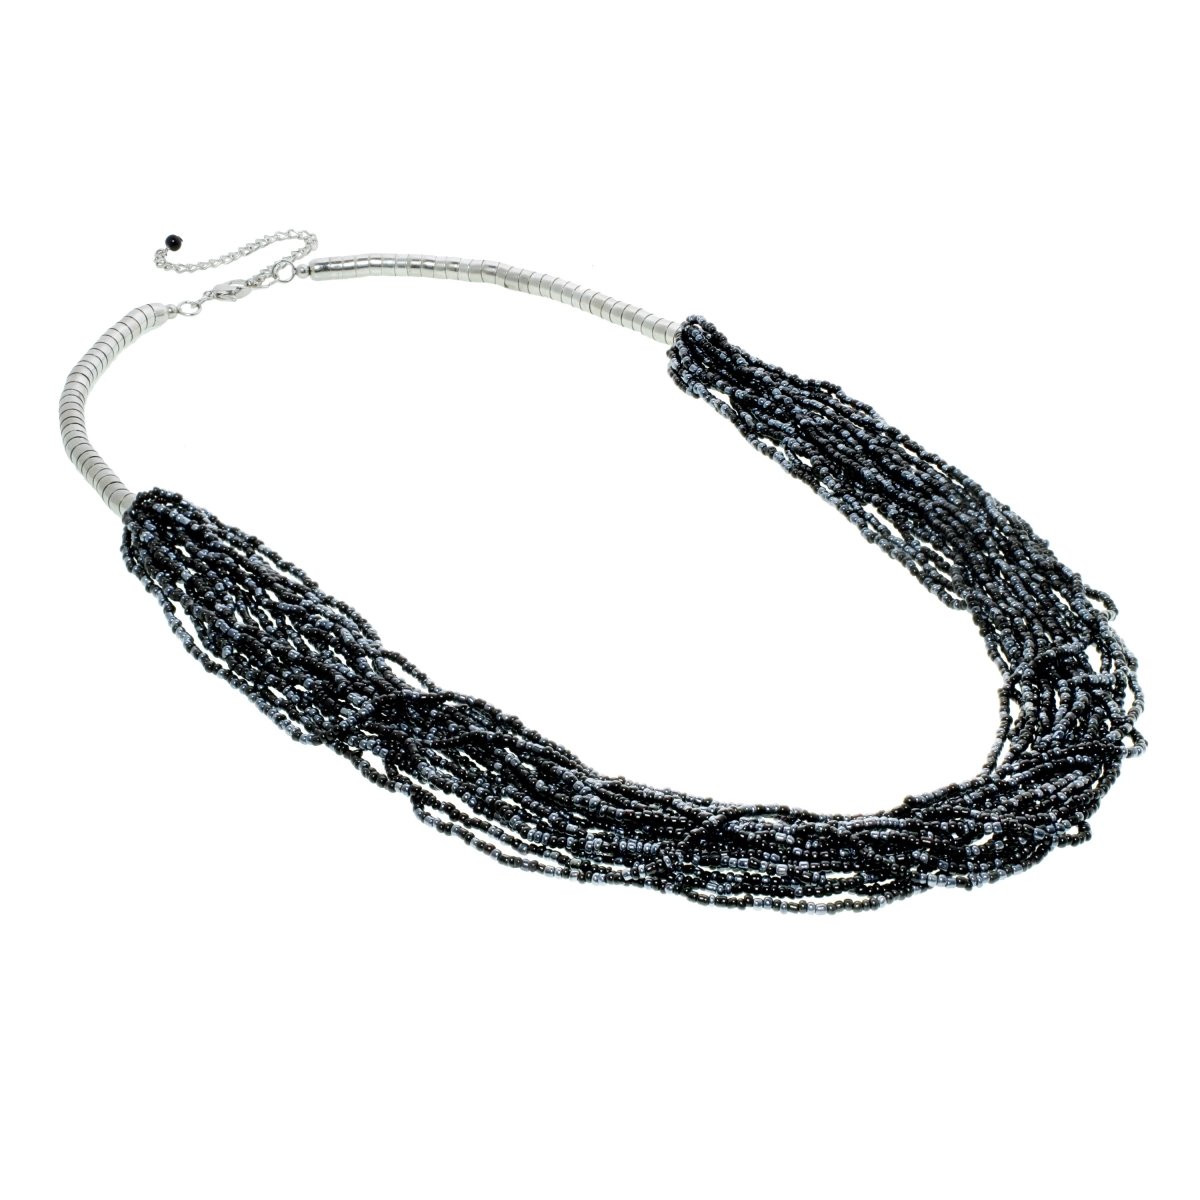 Picture of J&H Designs 4975-N Antiqued Rhodium-plated Mutli-strand Seed Bead Necklace